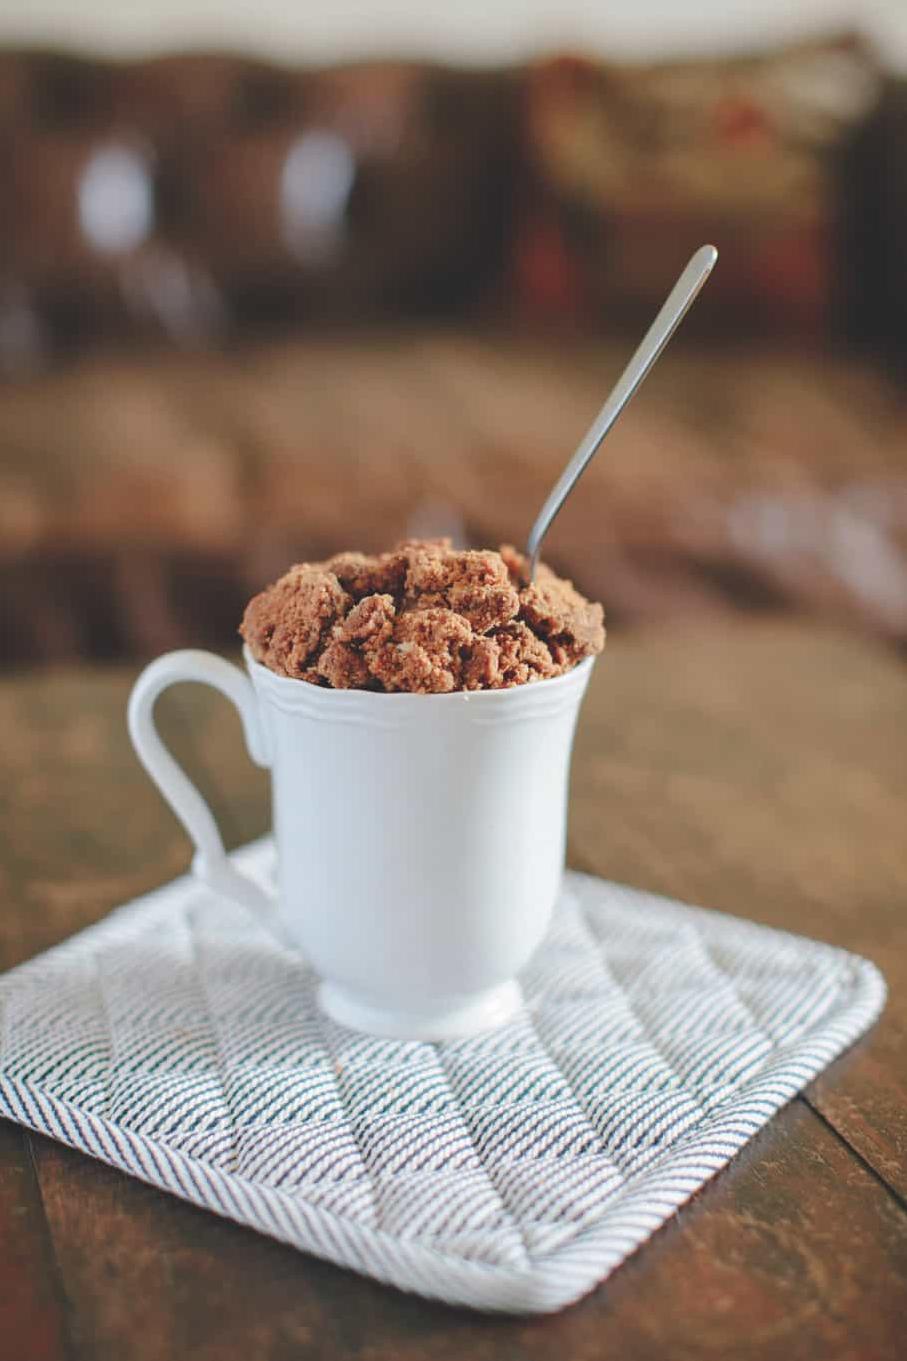  Start your day off right with this delicious Microwave Cinnamon Coffee Cake!